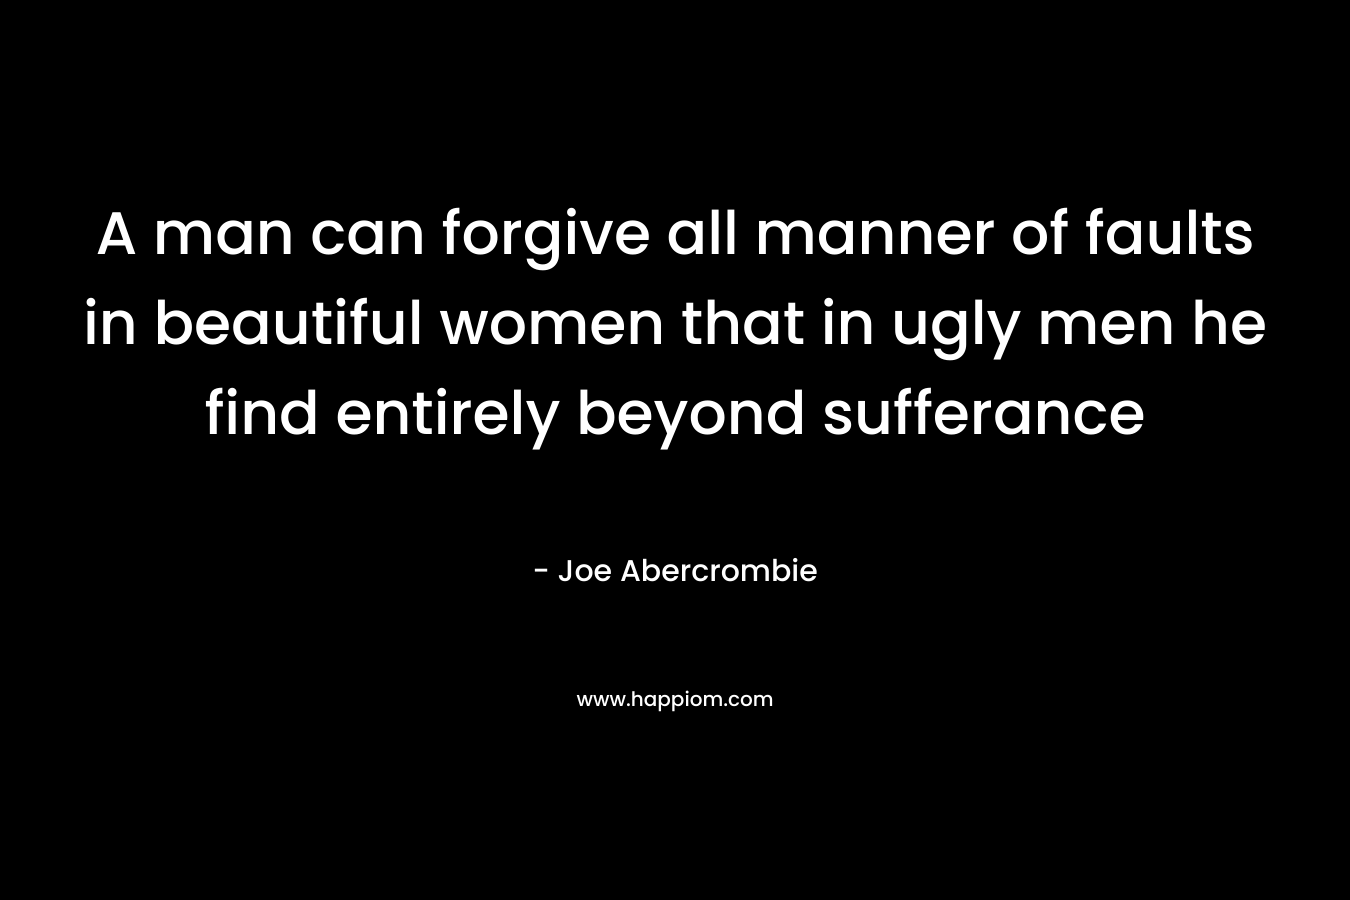 A man can forgive all manner of faults in beautiful women that in ugly men he find entirely beyond sufferance